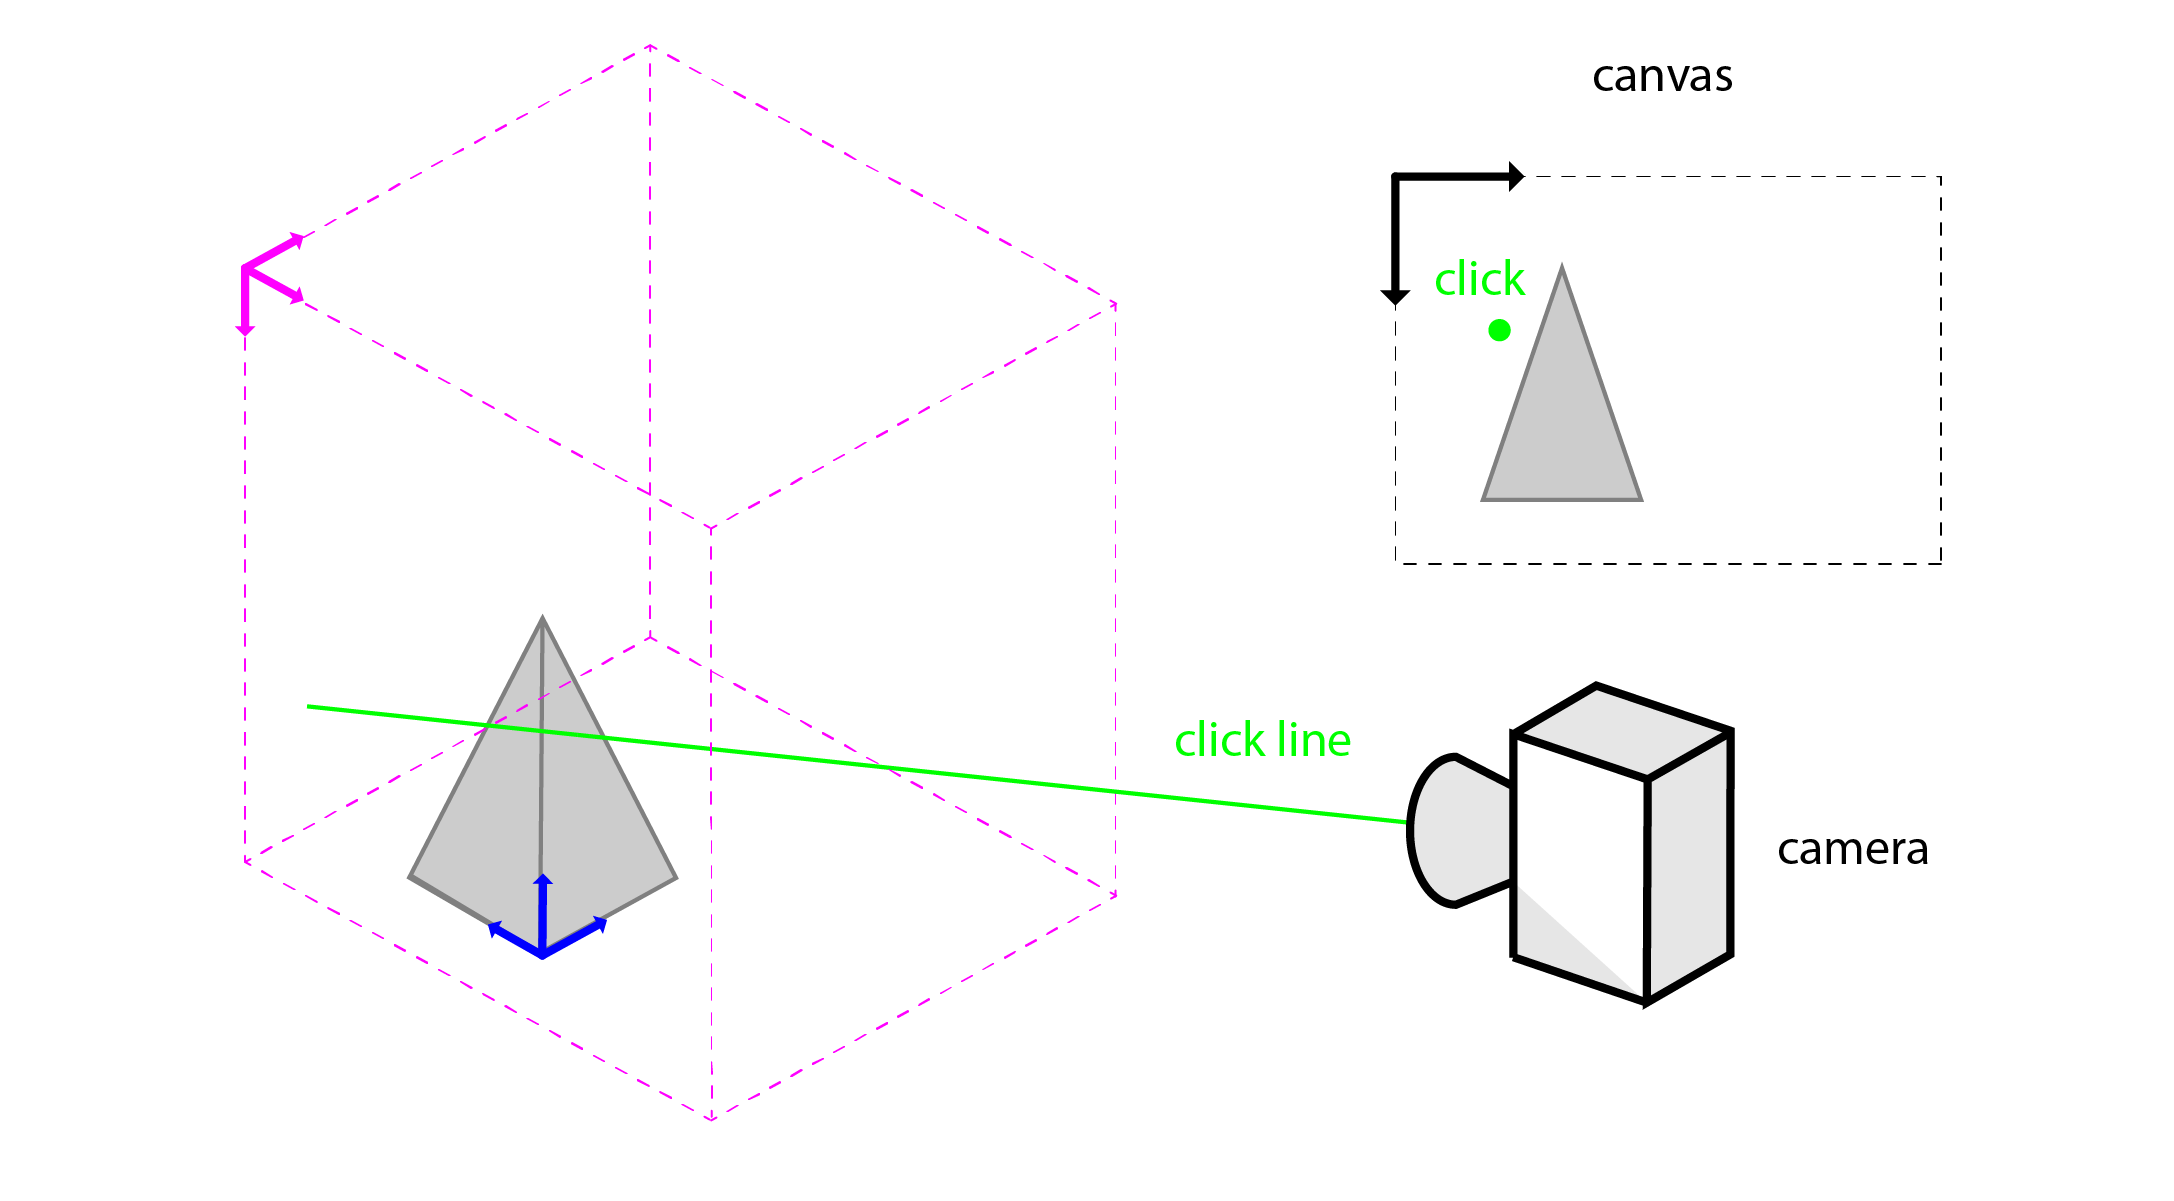 A diagram that shows how clicking on a 2D position on the canvas corresponds to a 3D click line in the scene that starts from the 3D camera position.